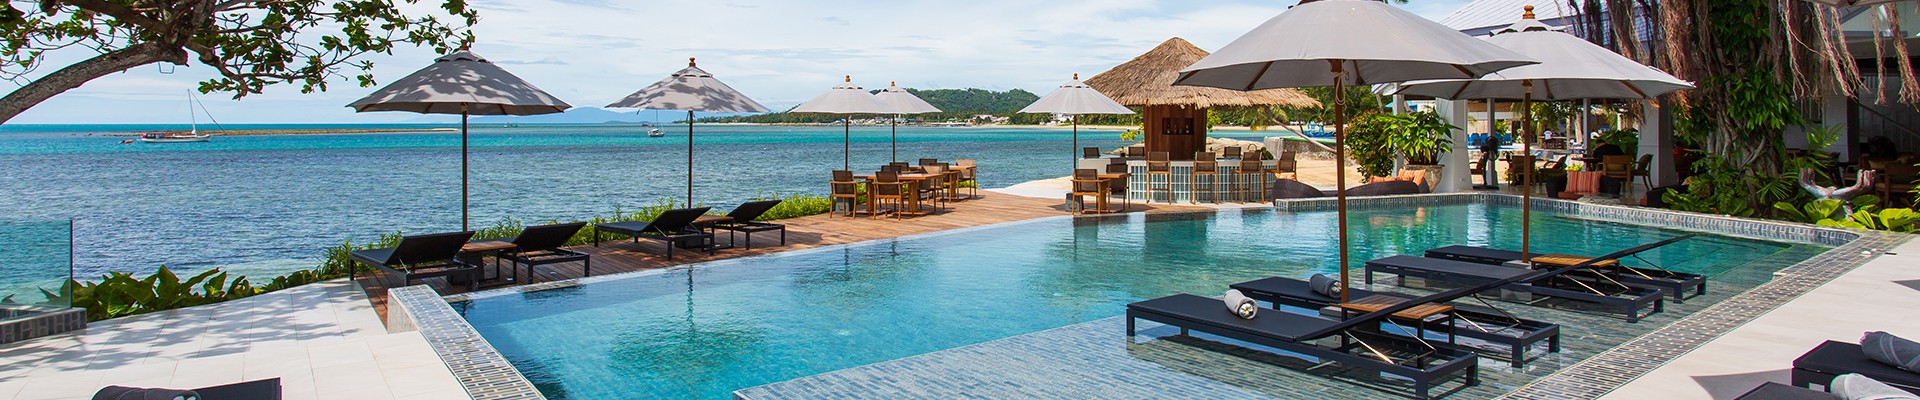 4* Rocky's Boutique Resort - Thailand Package (7 Nights)